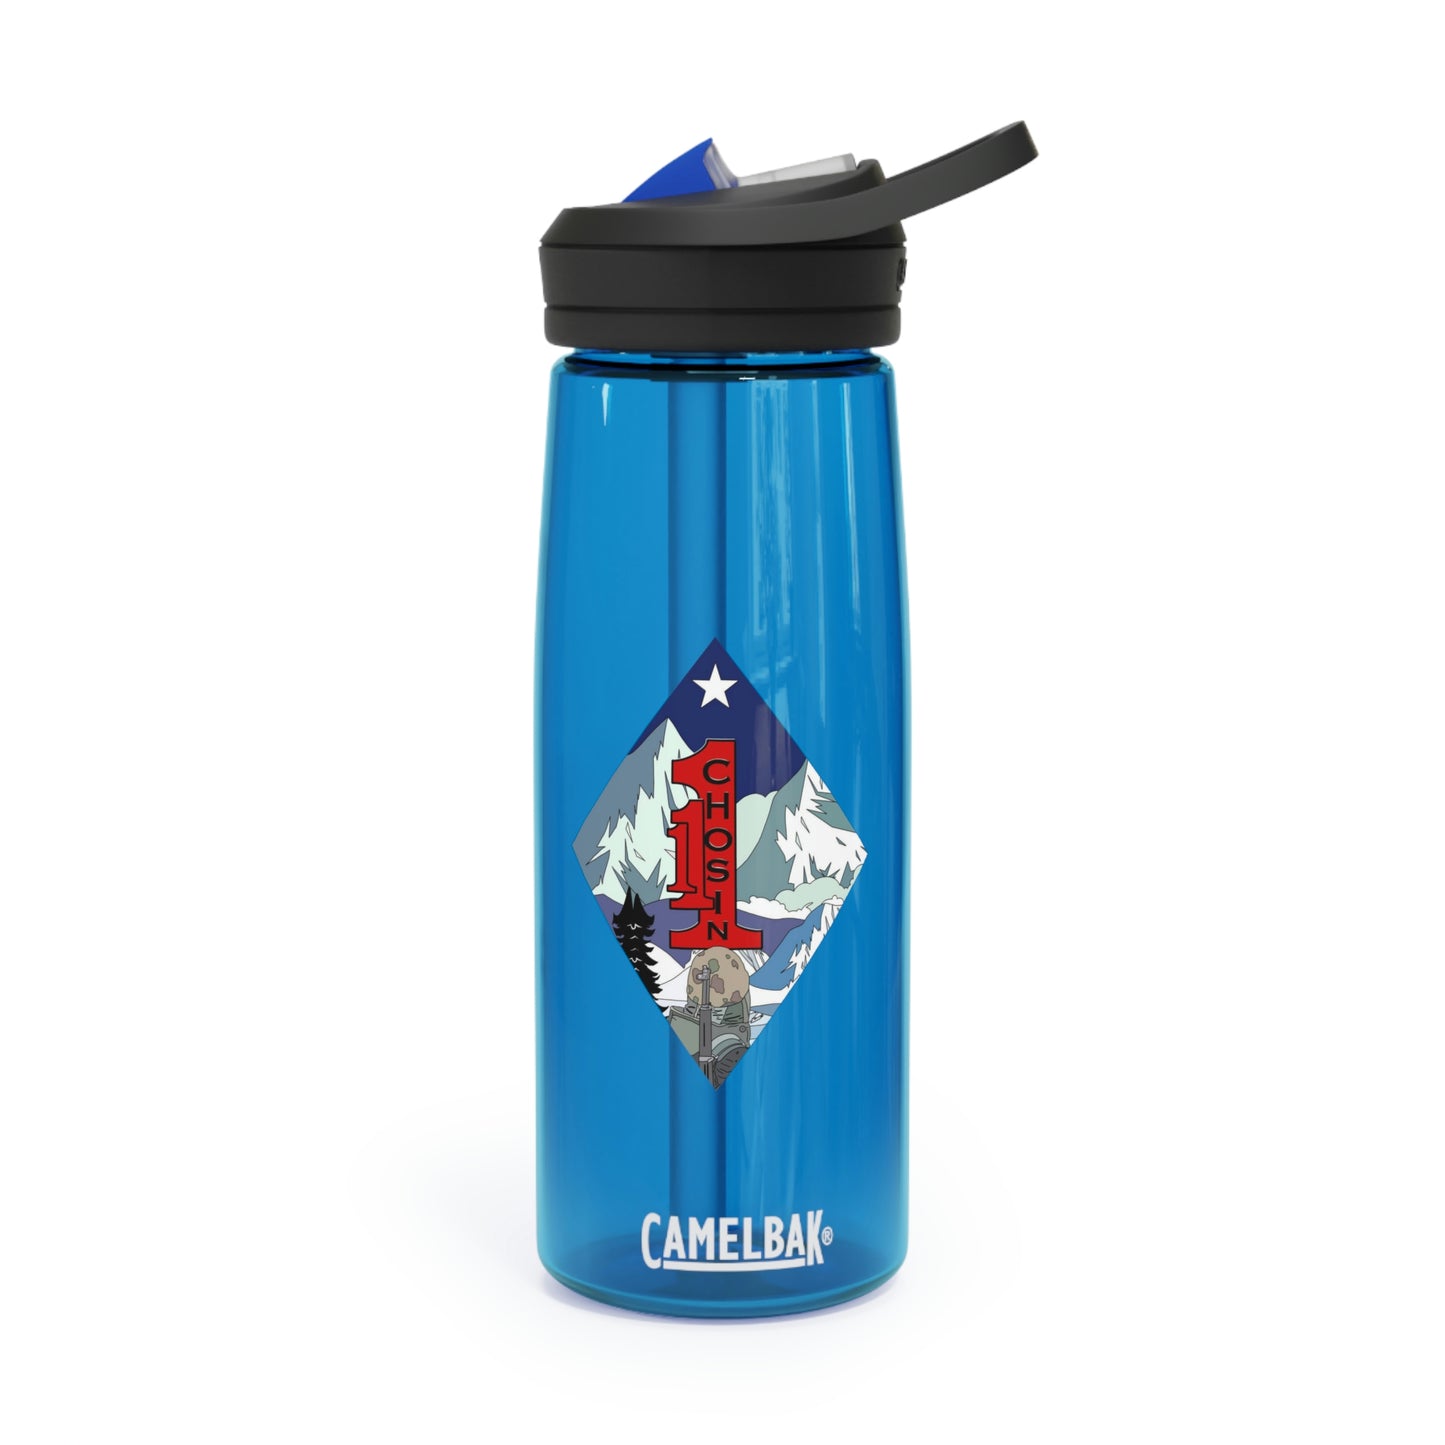 Chosin 1/1 First of the First CamelBak Eddy® Water Bottle, 25oz